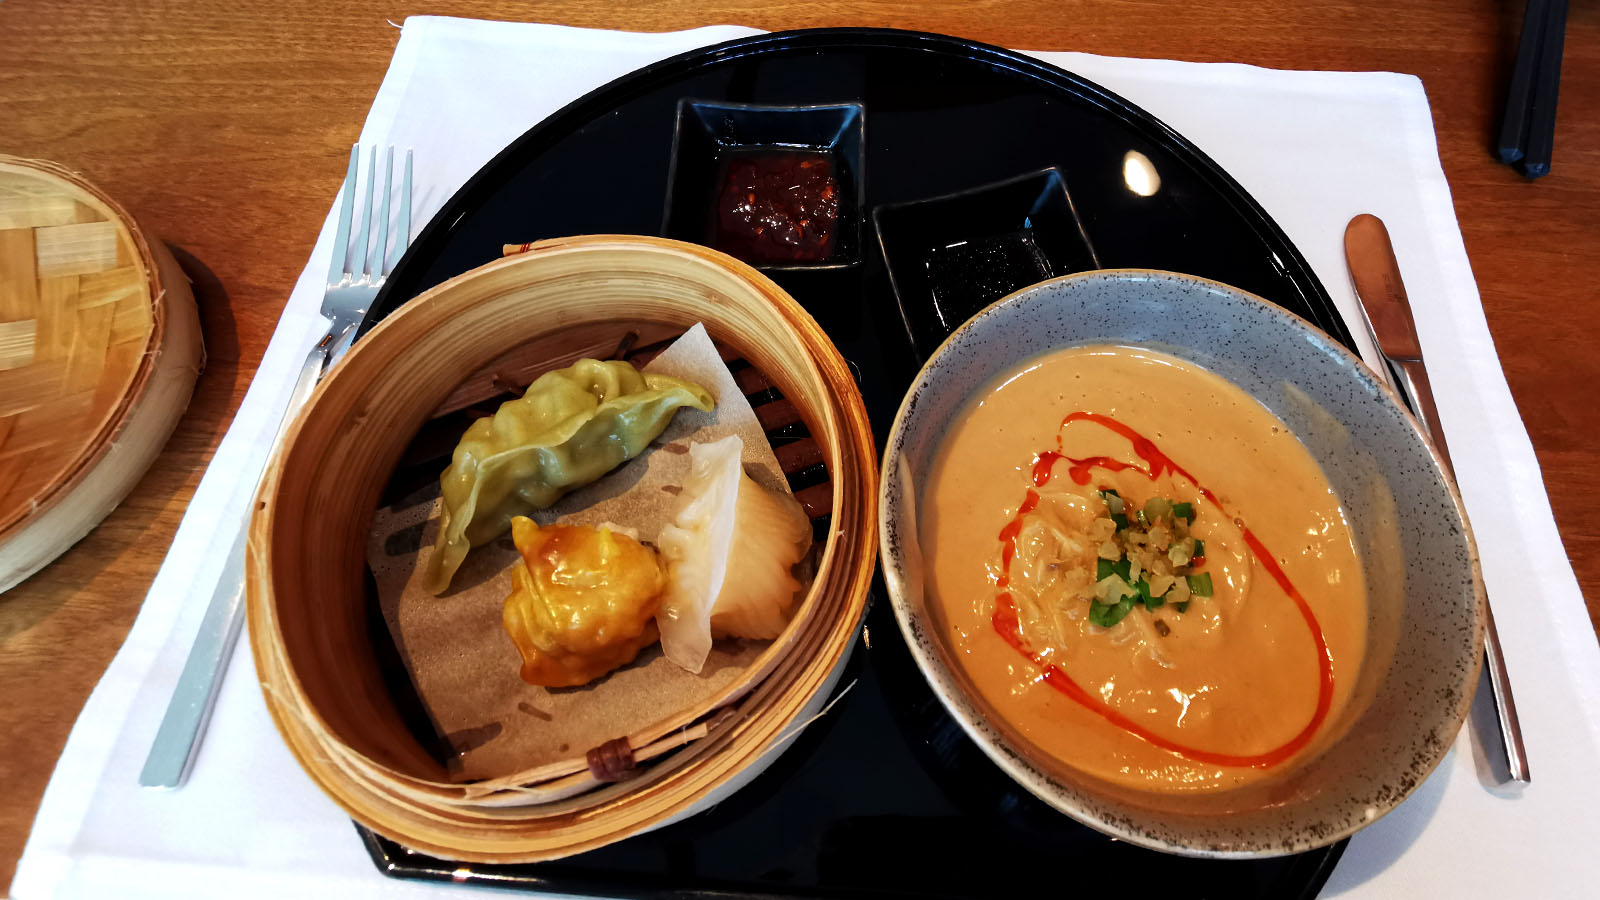 Dim sum and dan dan mien in the Cathay Pacific First Class Lounge, London Heathrow